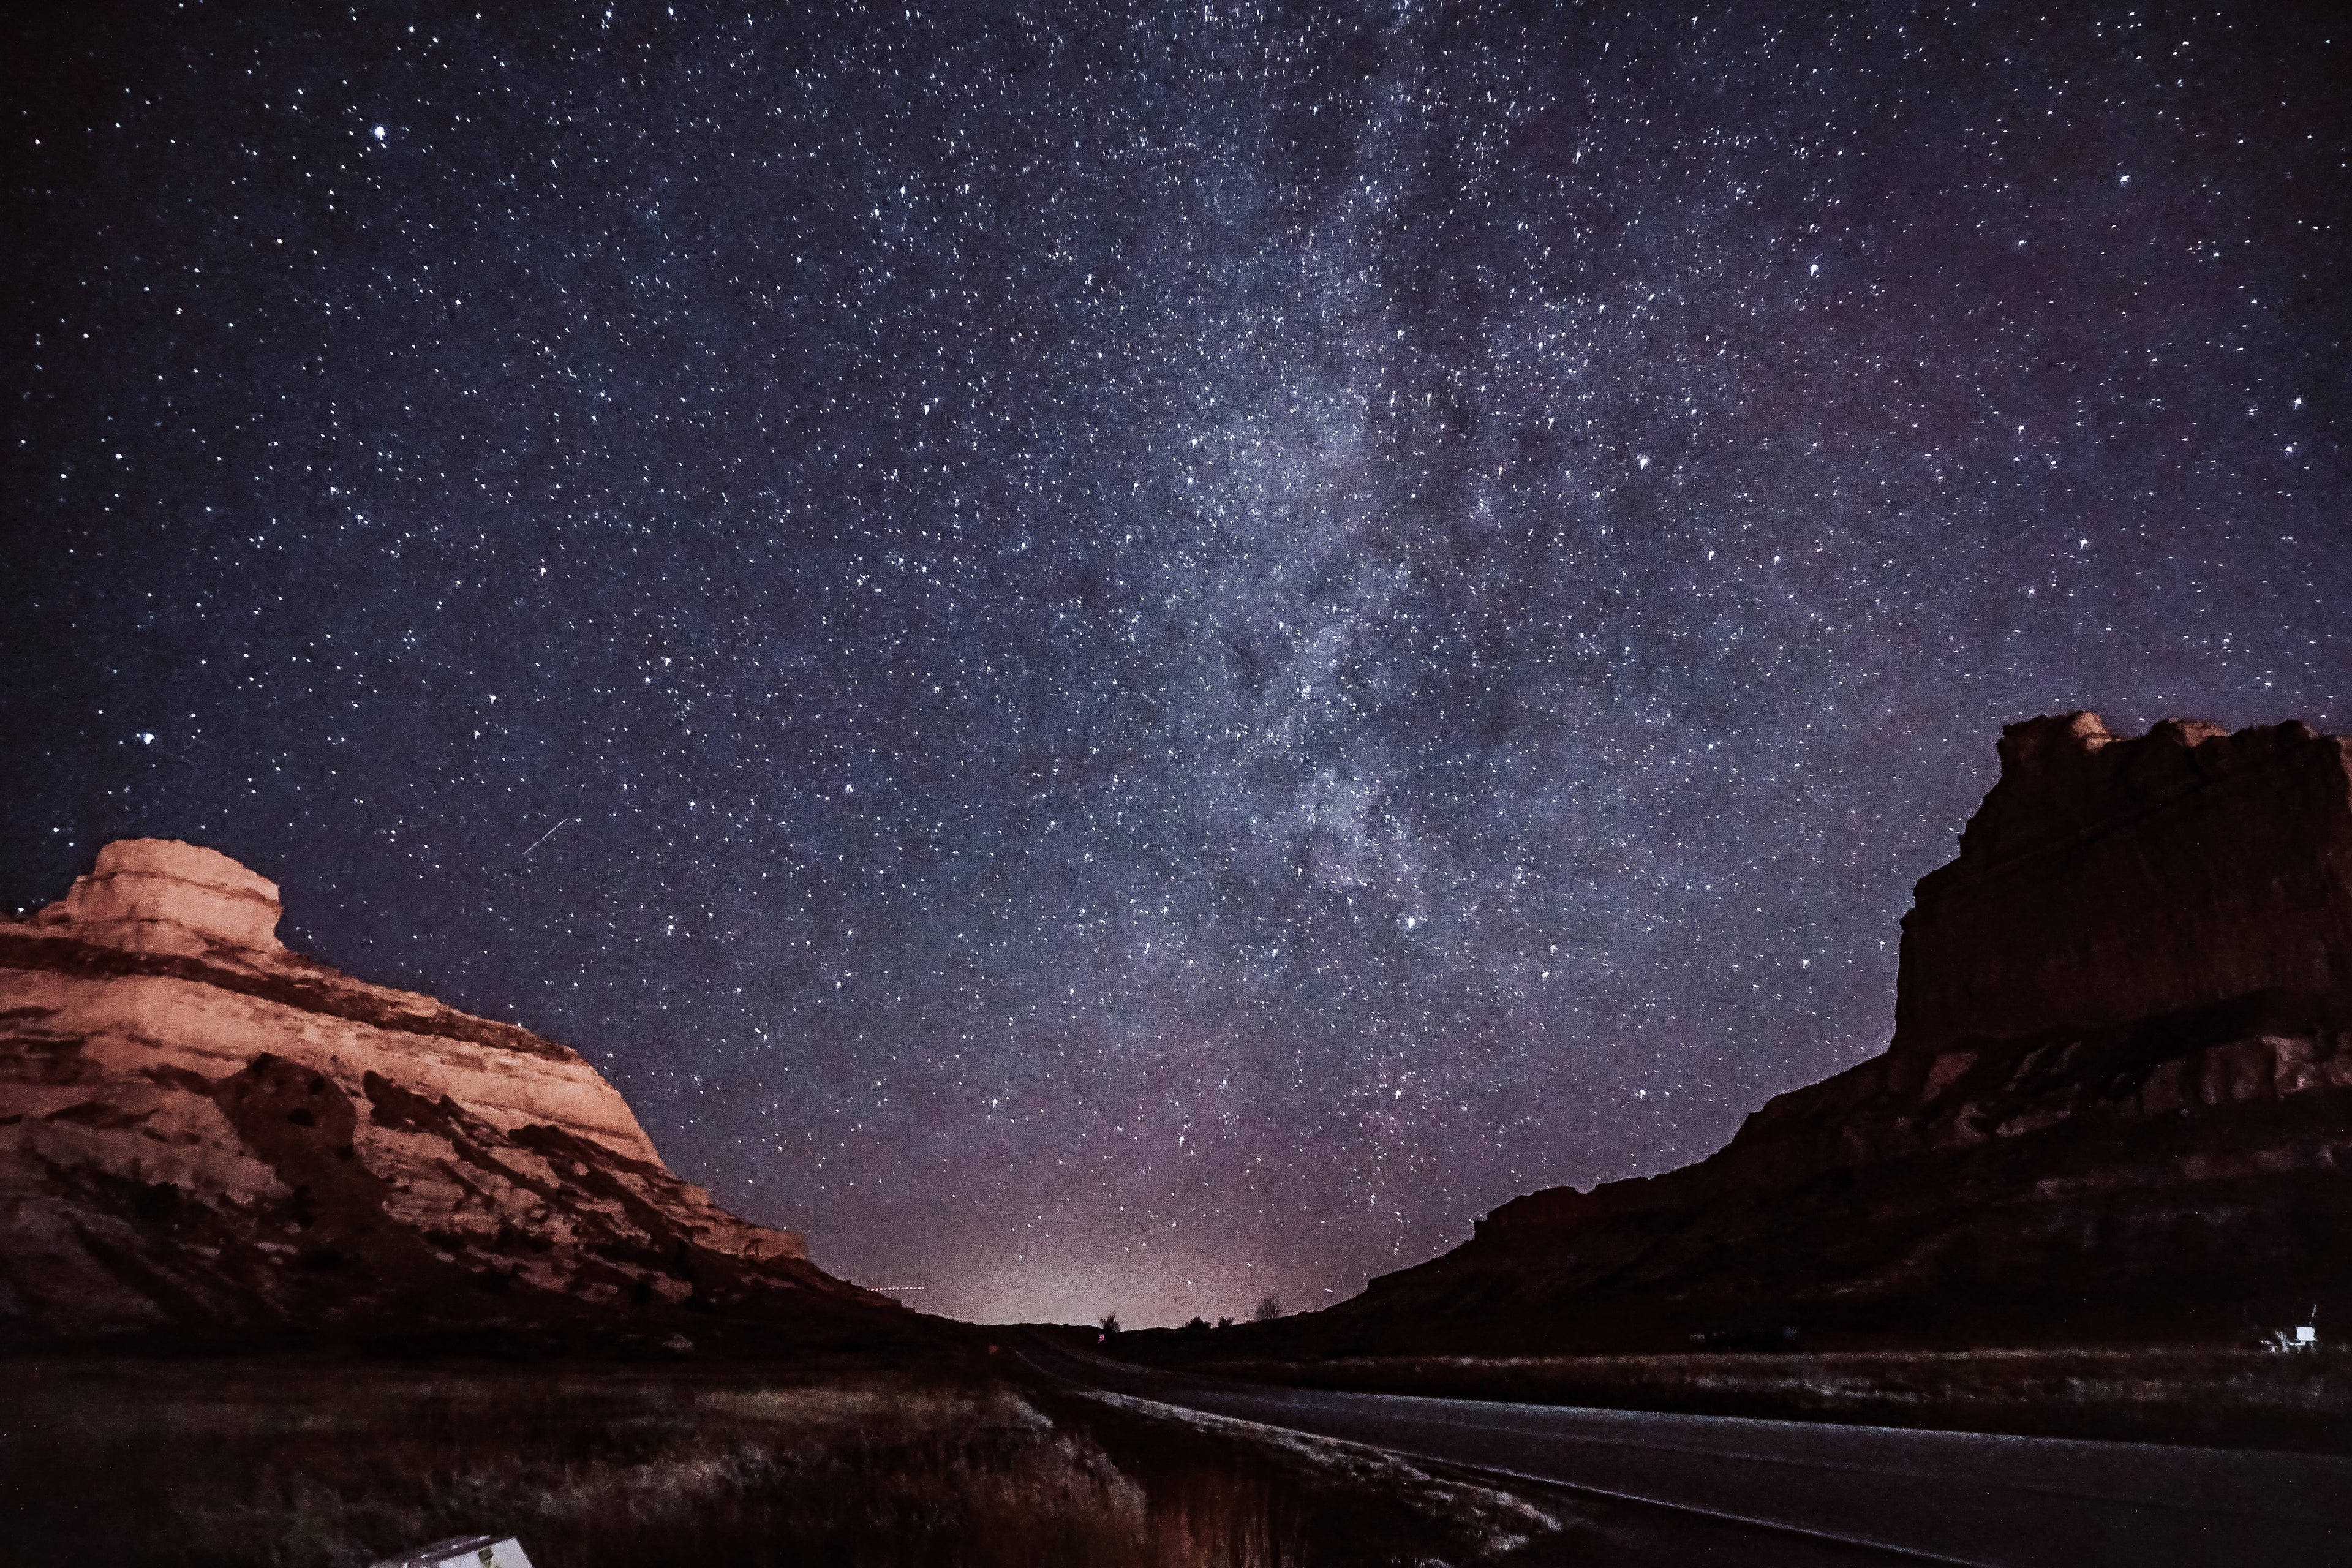 A view of the milky way galaxy above an open road through dessert canyons